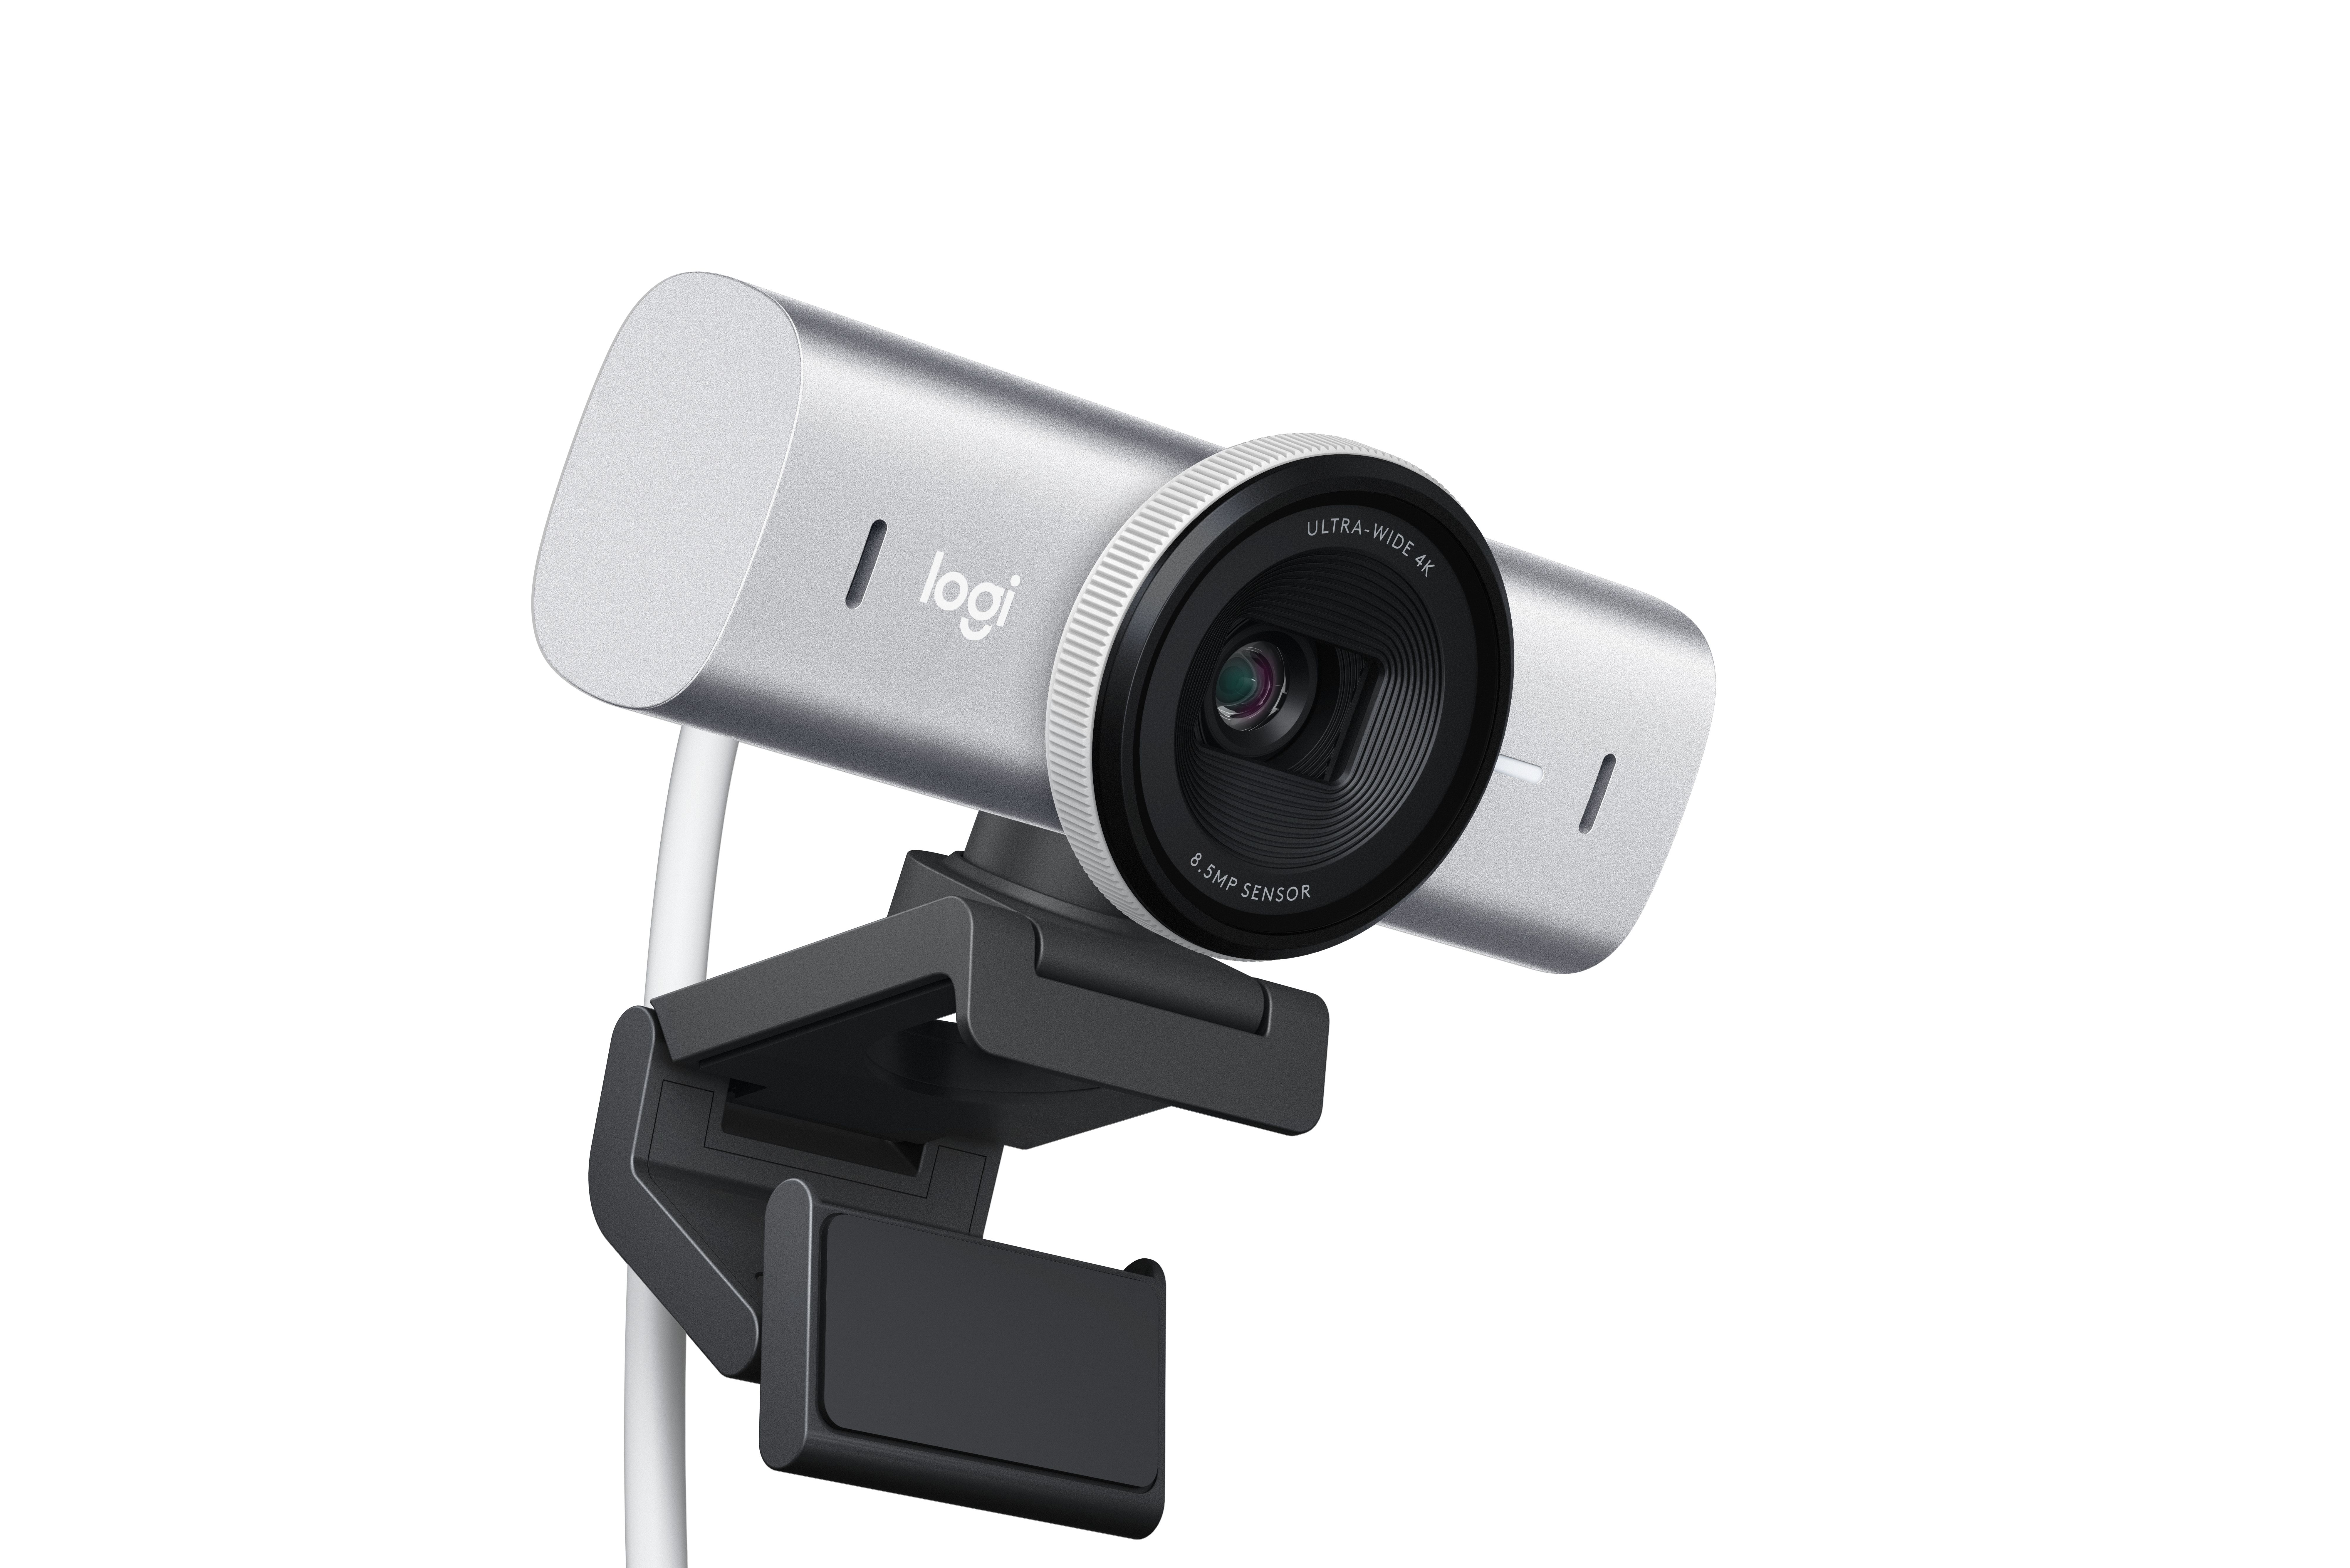 Logitech revolutionizes the world of work and streaming with the new MX Brio webcam